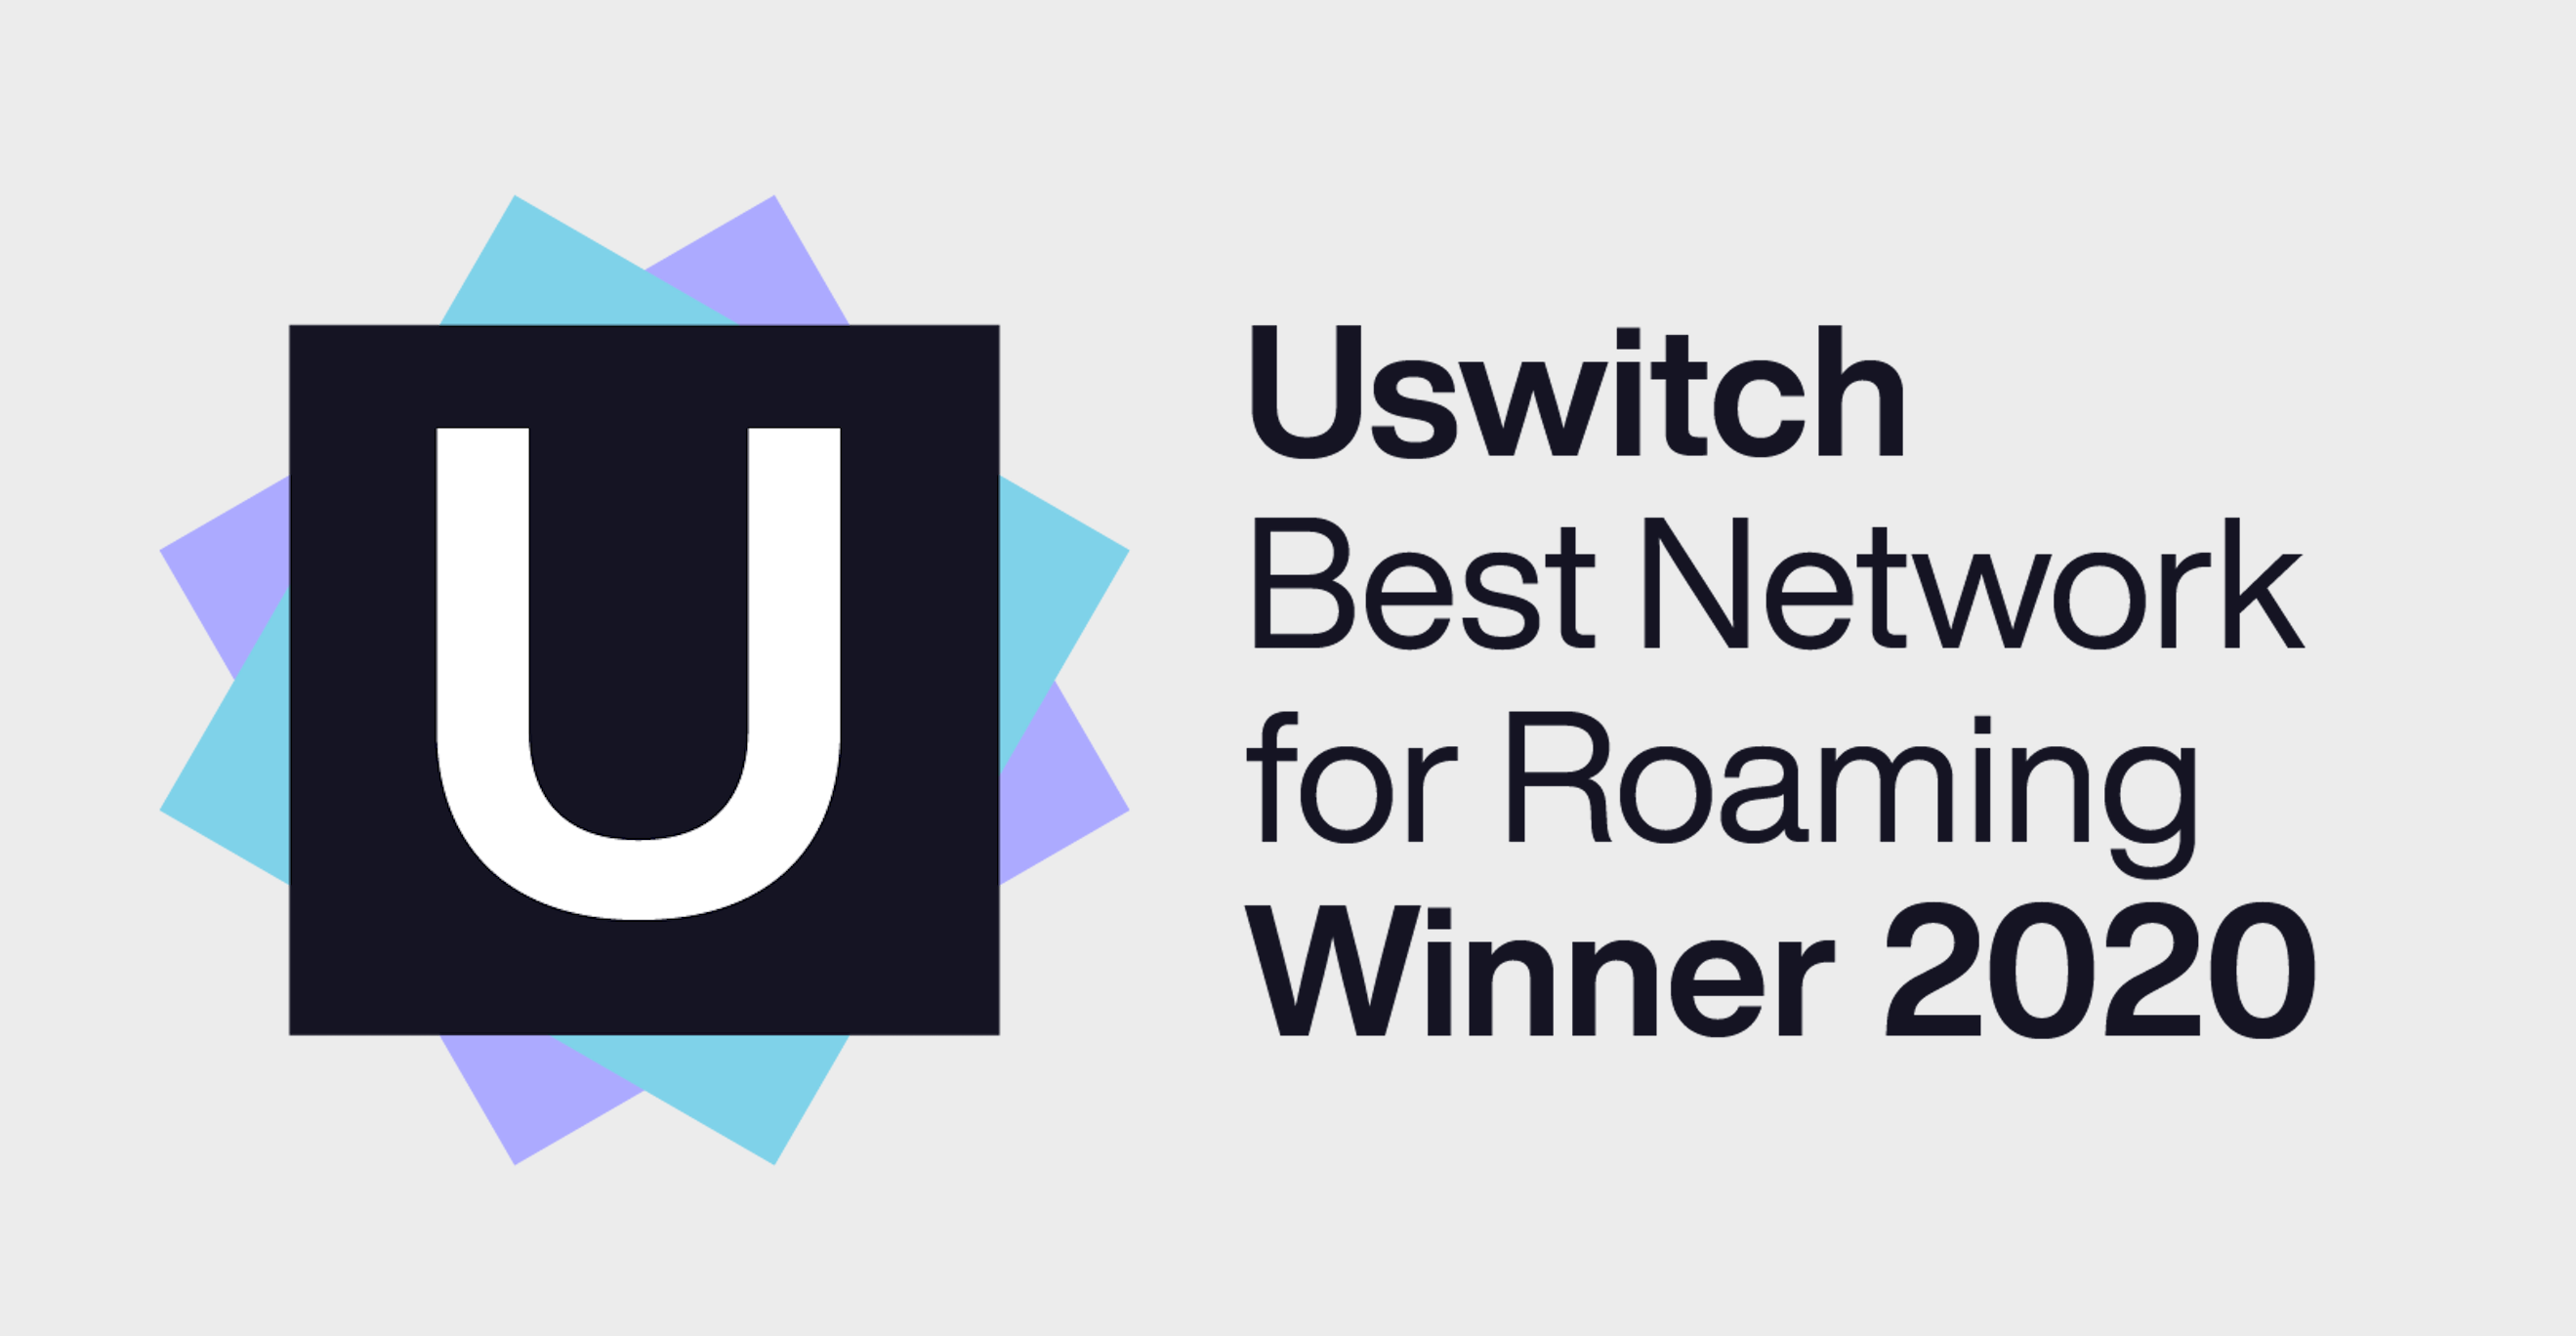 Best Network for Roaming Winner 2020 by Uswitch